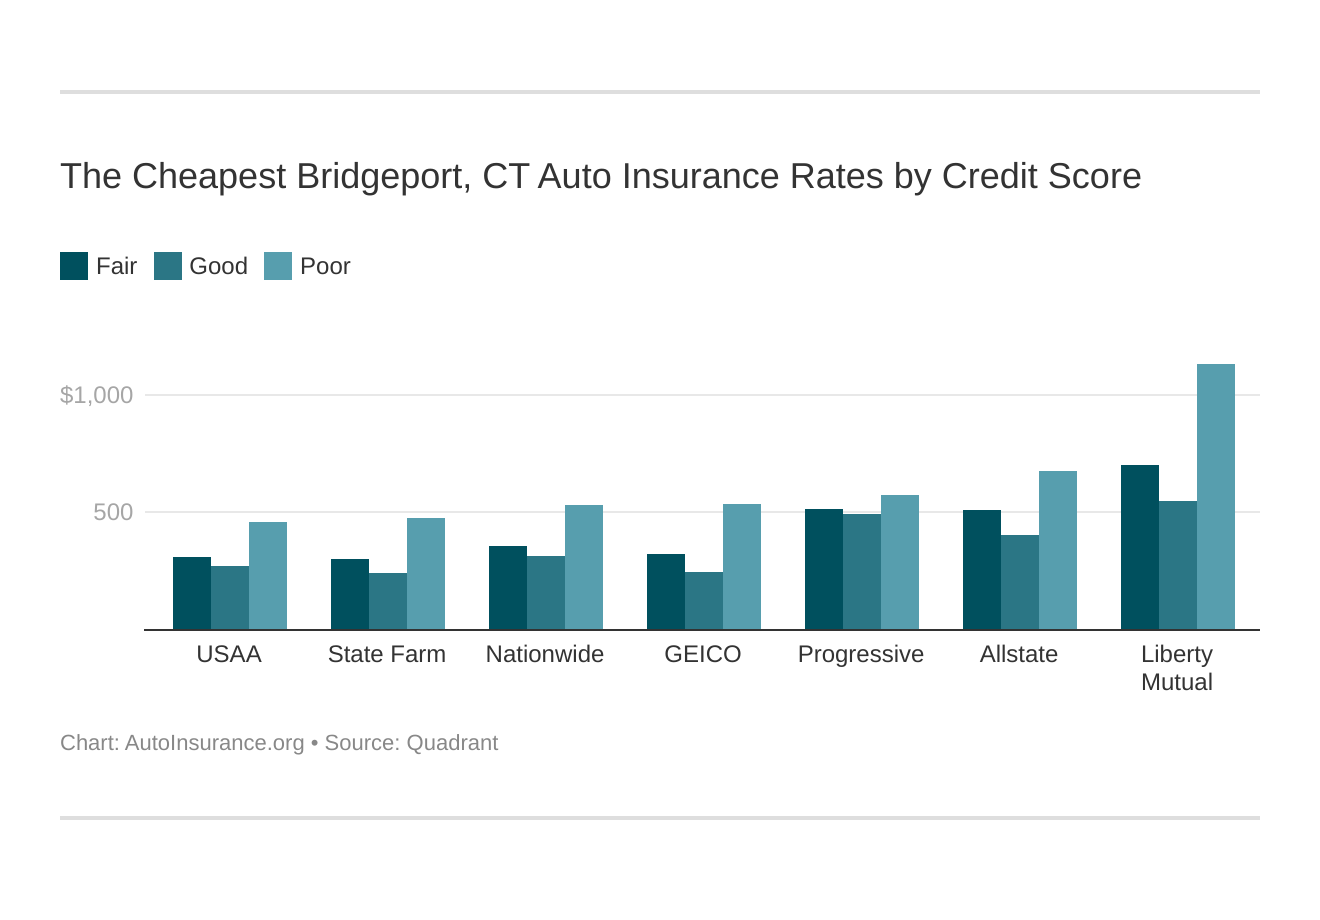 The Cheapest Bridgeport, CT Auto Insurance Rates by Credit Score